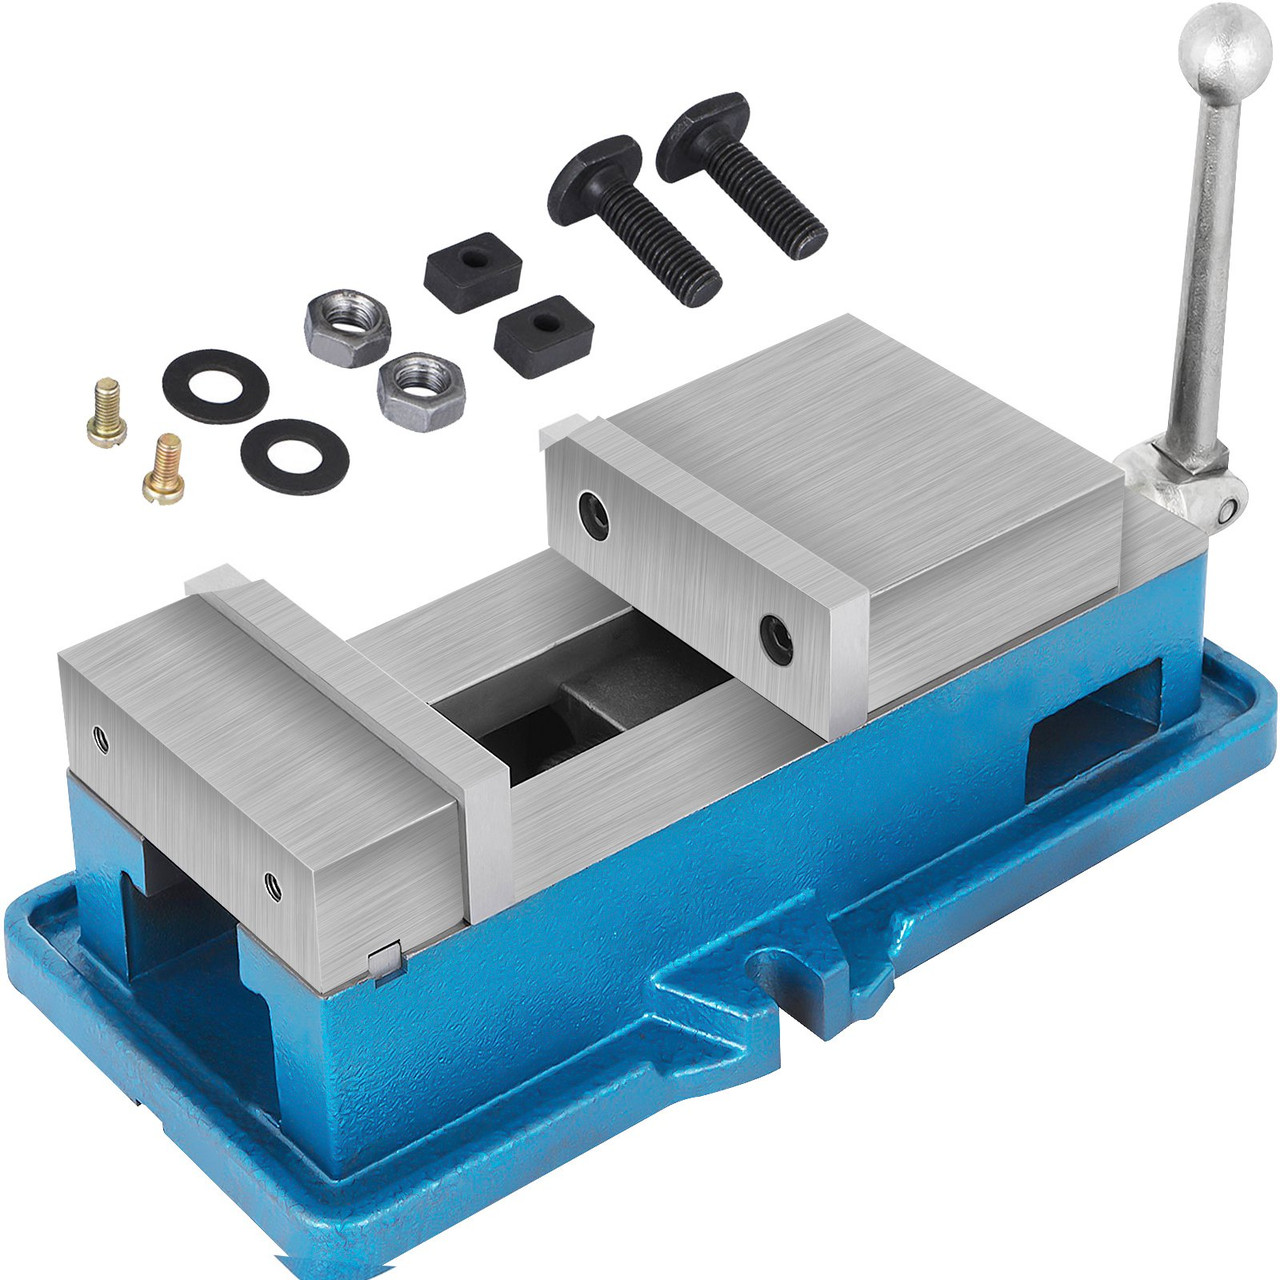 4'' Lockdown Vise Milling Drilling Machine Clamp Vice Precise Scale CNC